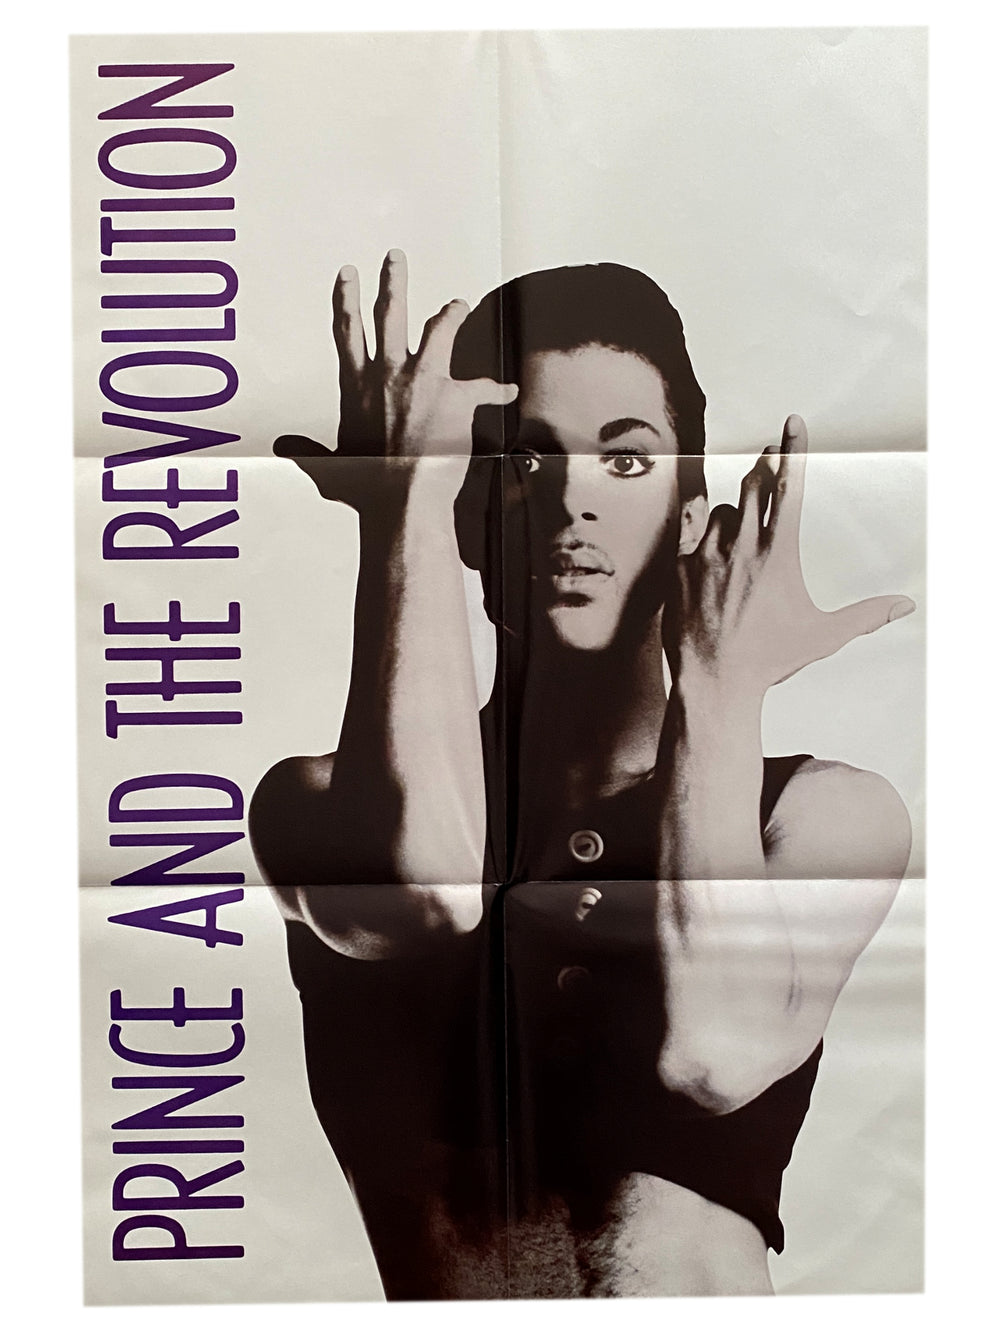 Prince – & The Revolution Girls & Boys 12 Inch Vinyl Single EU German Release With Poster